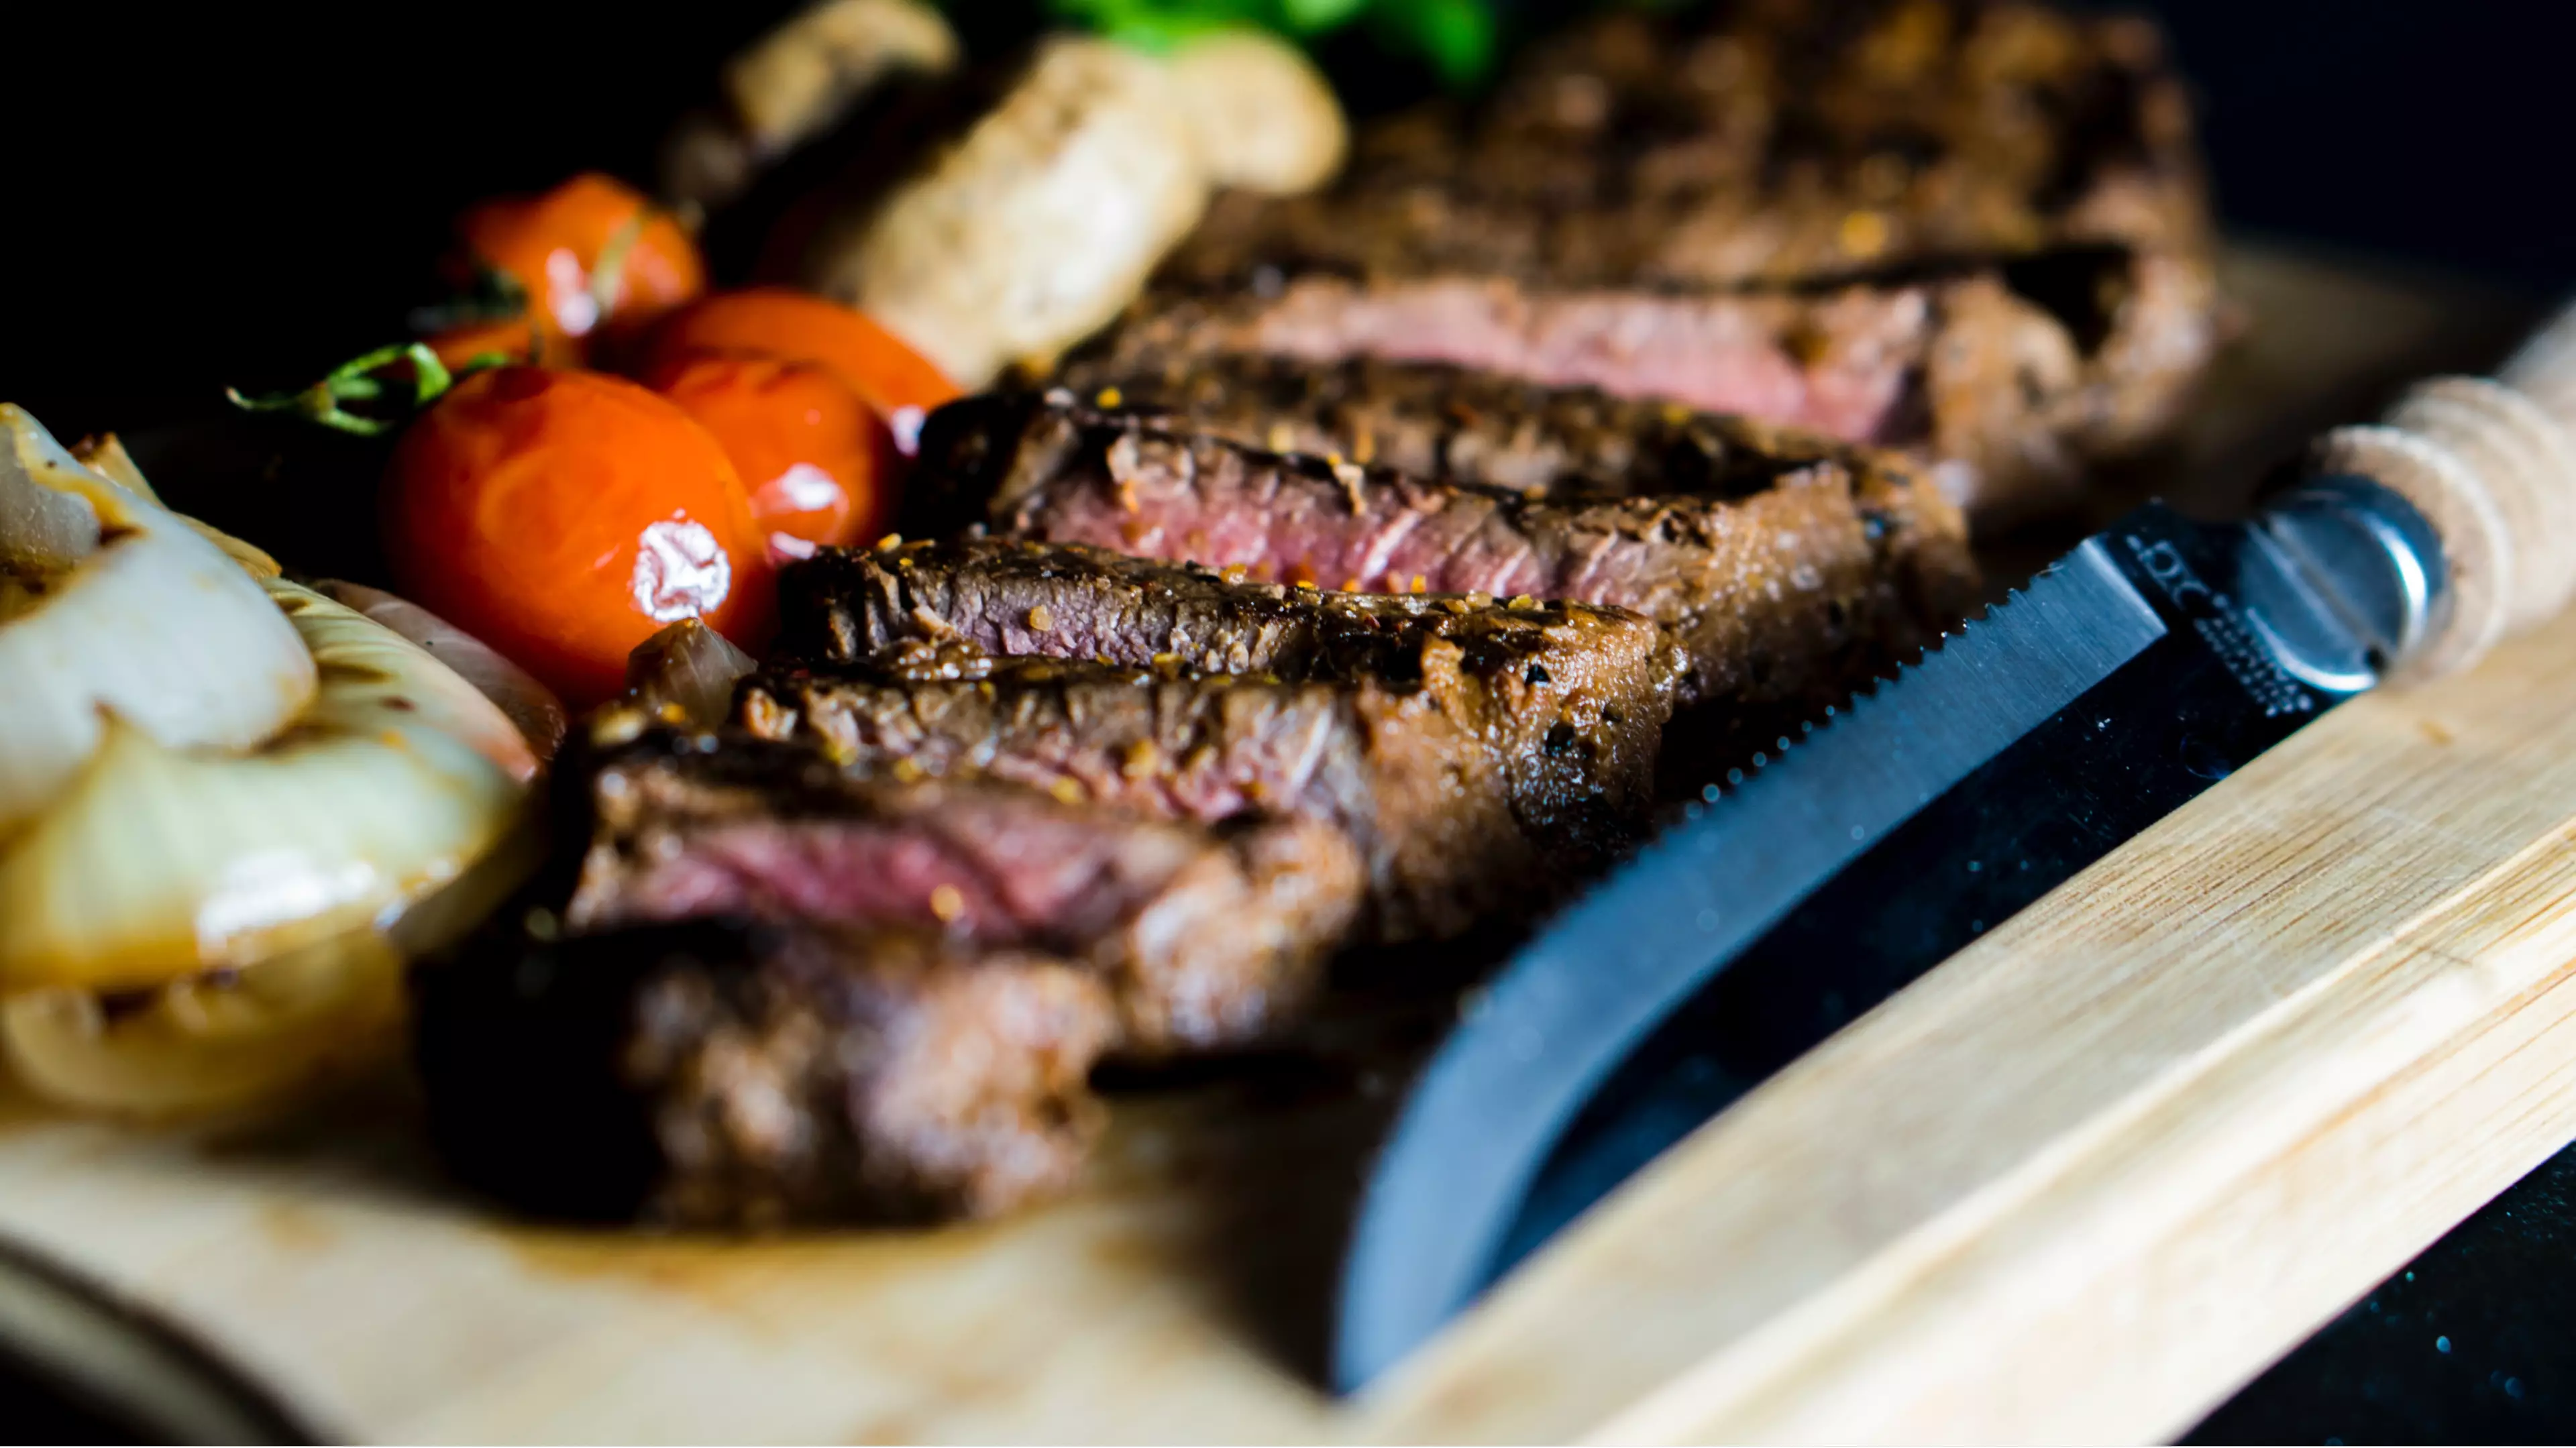 A Restaurant Is Getting Rinsed For Selling A 'Ladies' Fillet Steak'